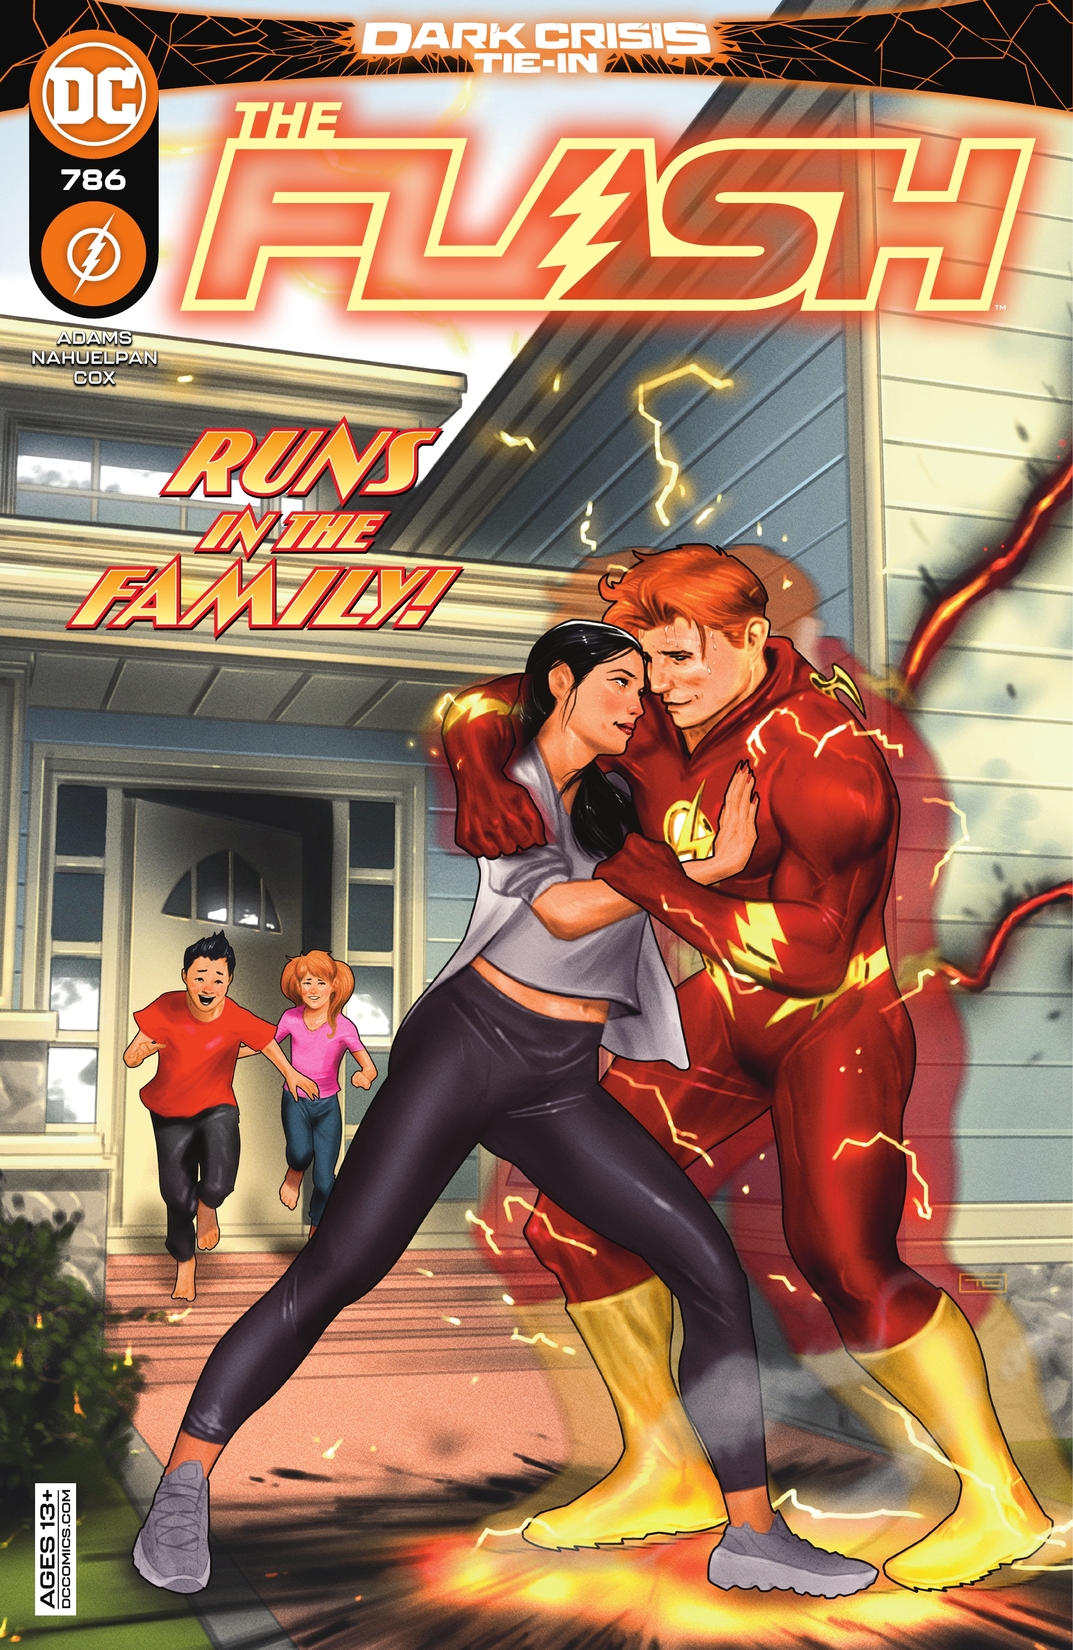 The Flash (2016-) #786 preview images